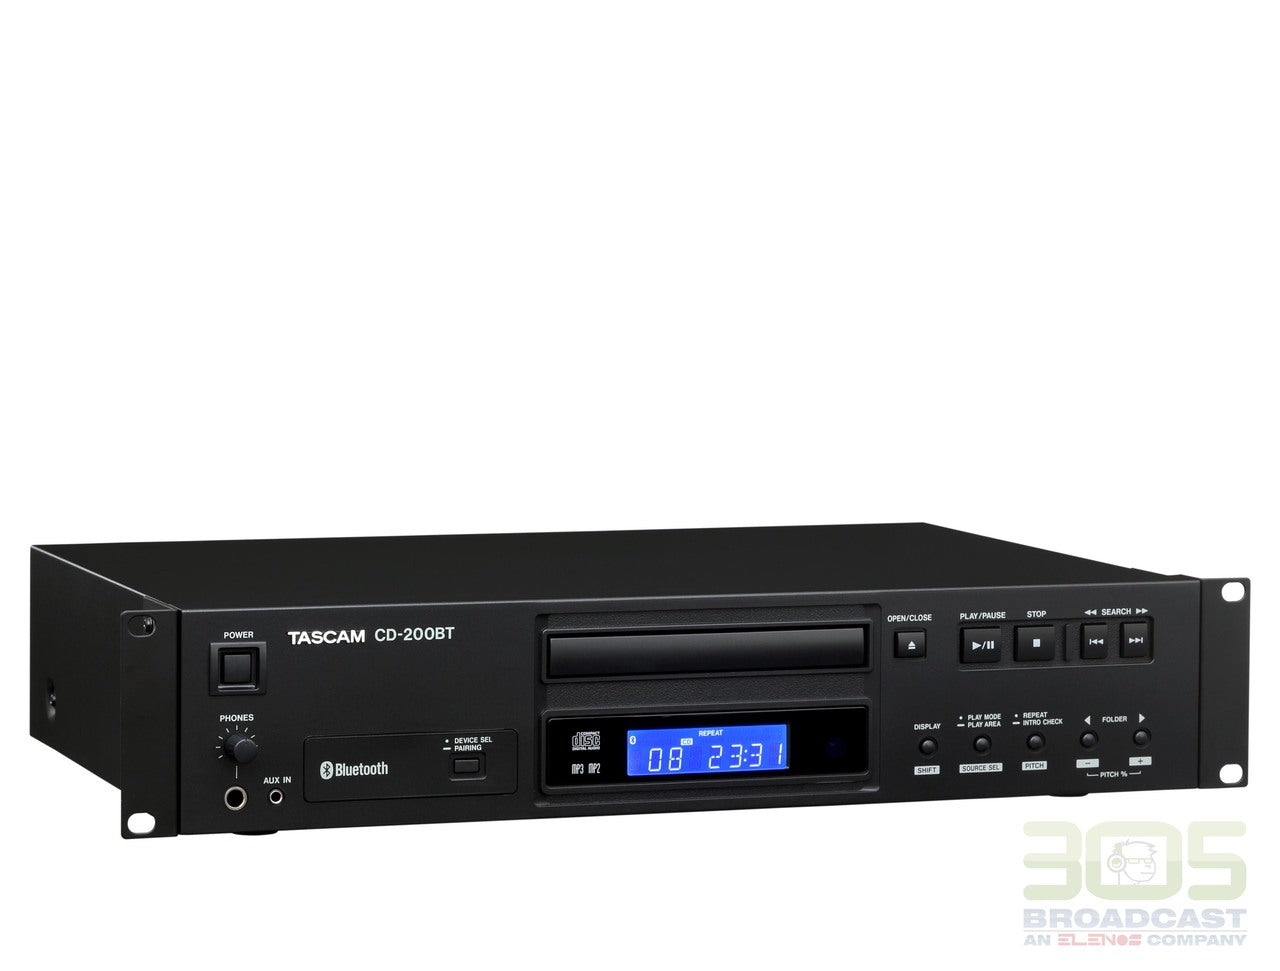 Tascam CD-200BT -  Professional CD Player with Bluetooth Receiver - 305broadcast